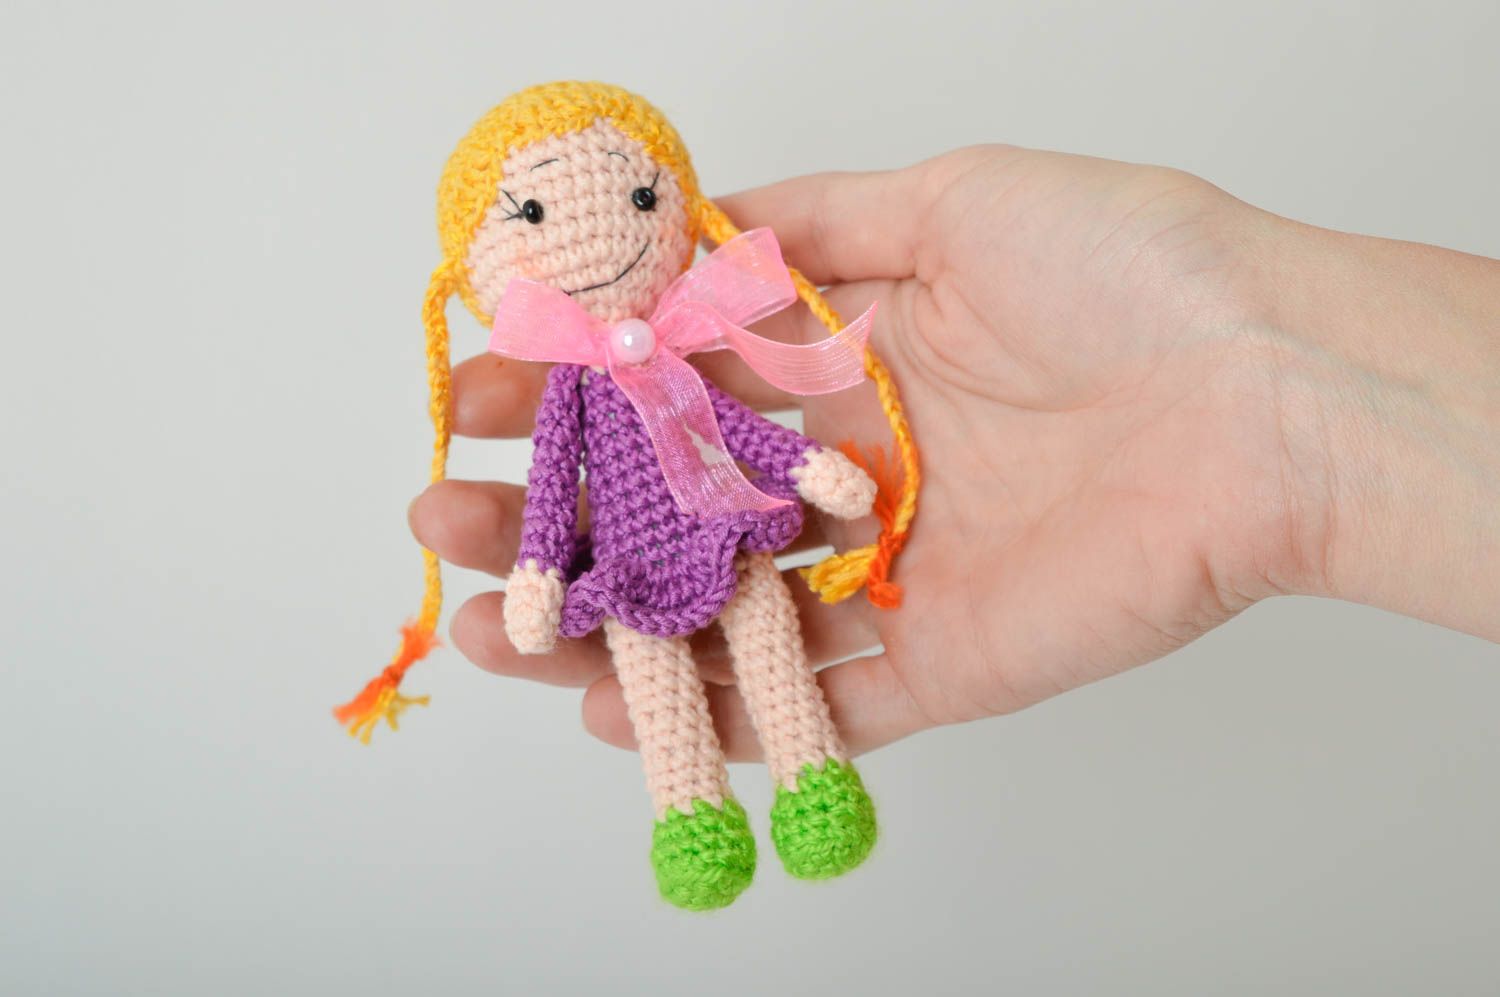 Cute doll handmade crocheted toy for children stuffed toys hand-crocheted toys photo 5